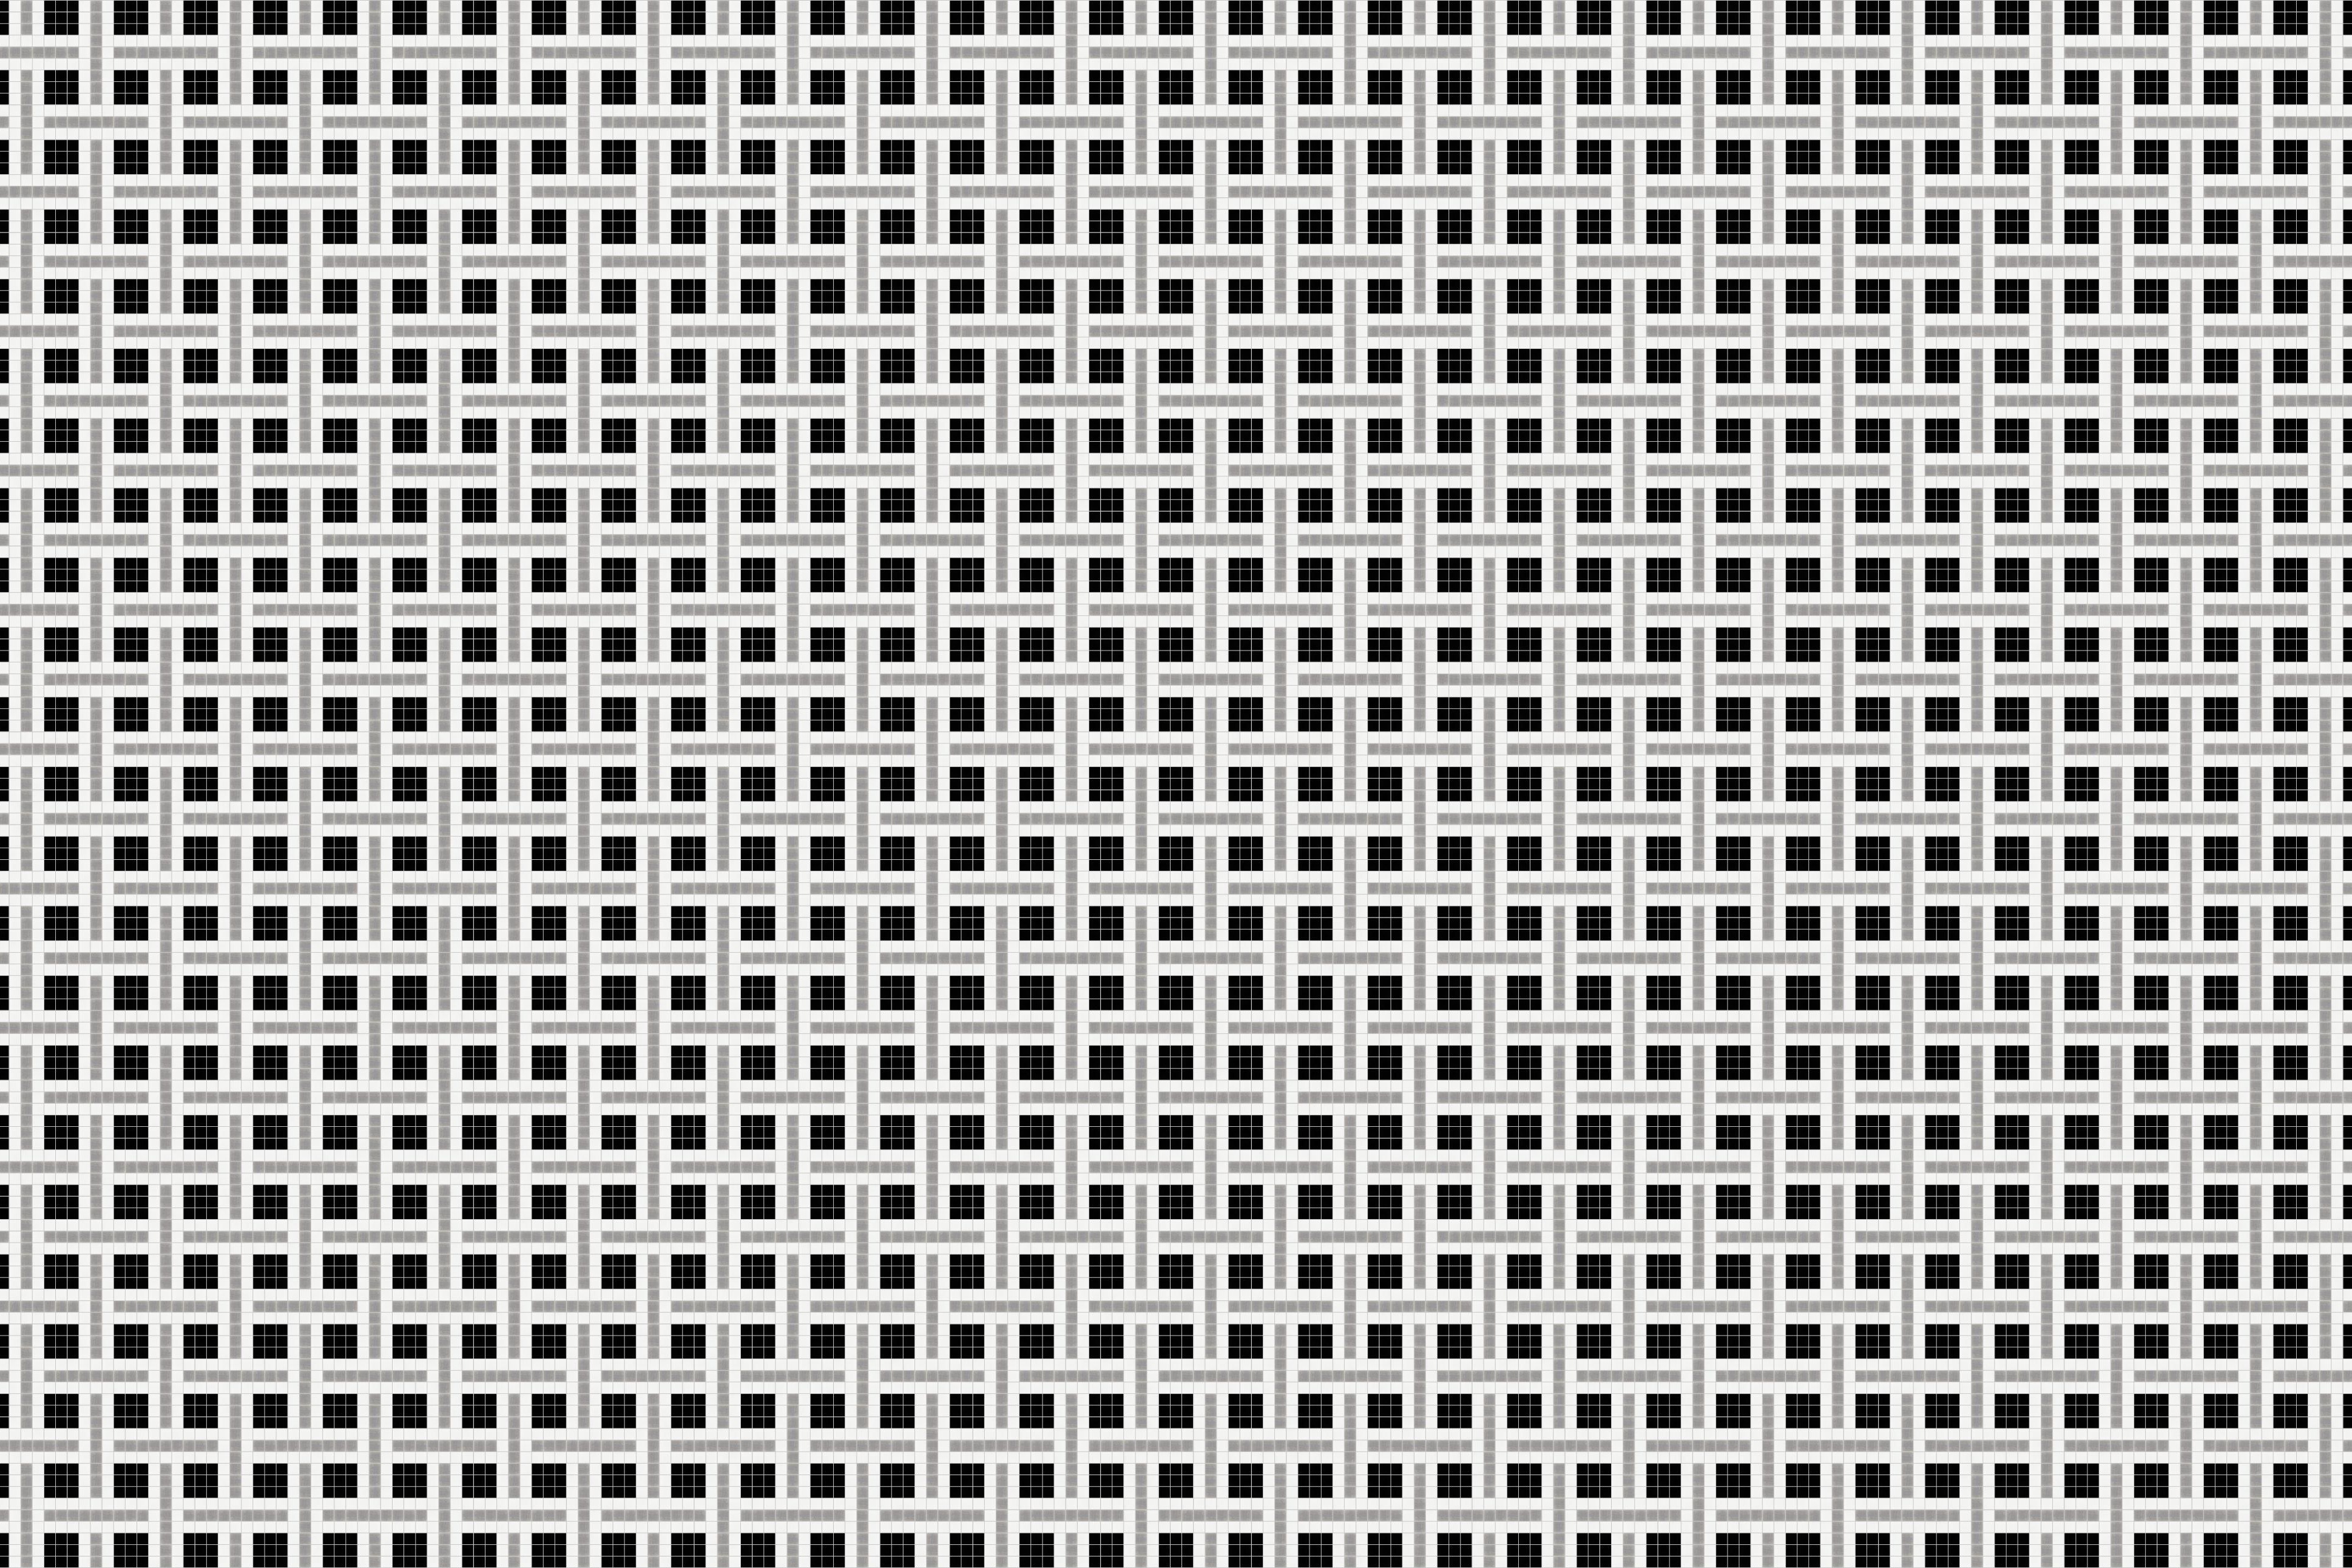 A vector seamless pattern with wire mesh in great condition. Black